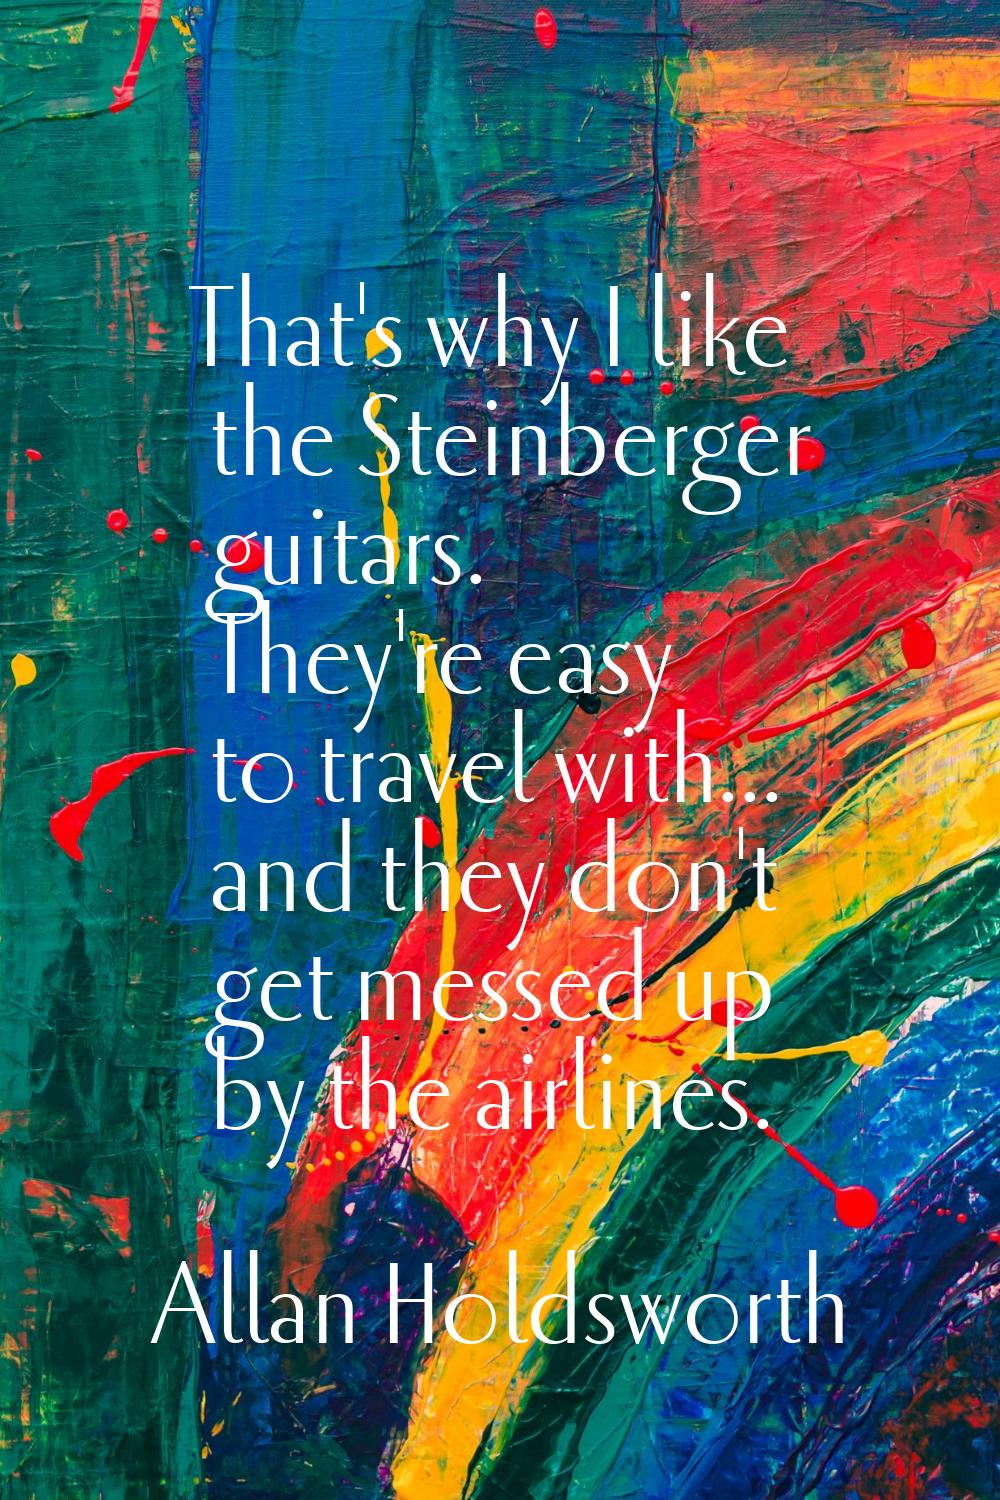 That's why I like the Steinberger guitars. They're easy to travel with... and they don't get messed